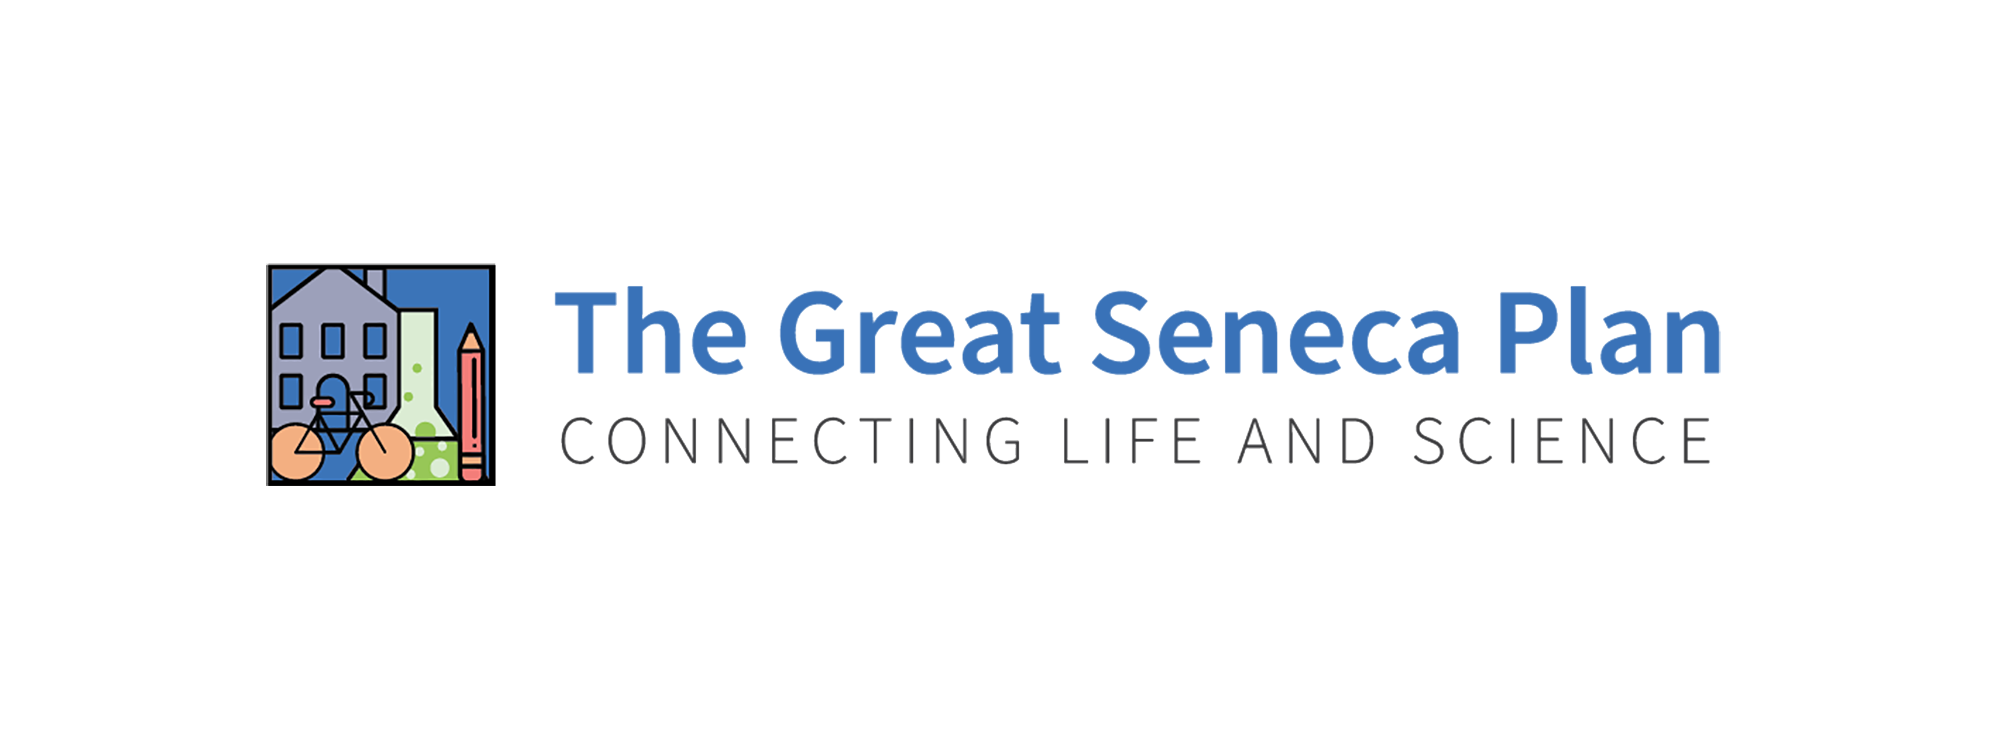 The Great Seneca Plan, Connecting Life and Science